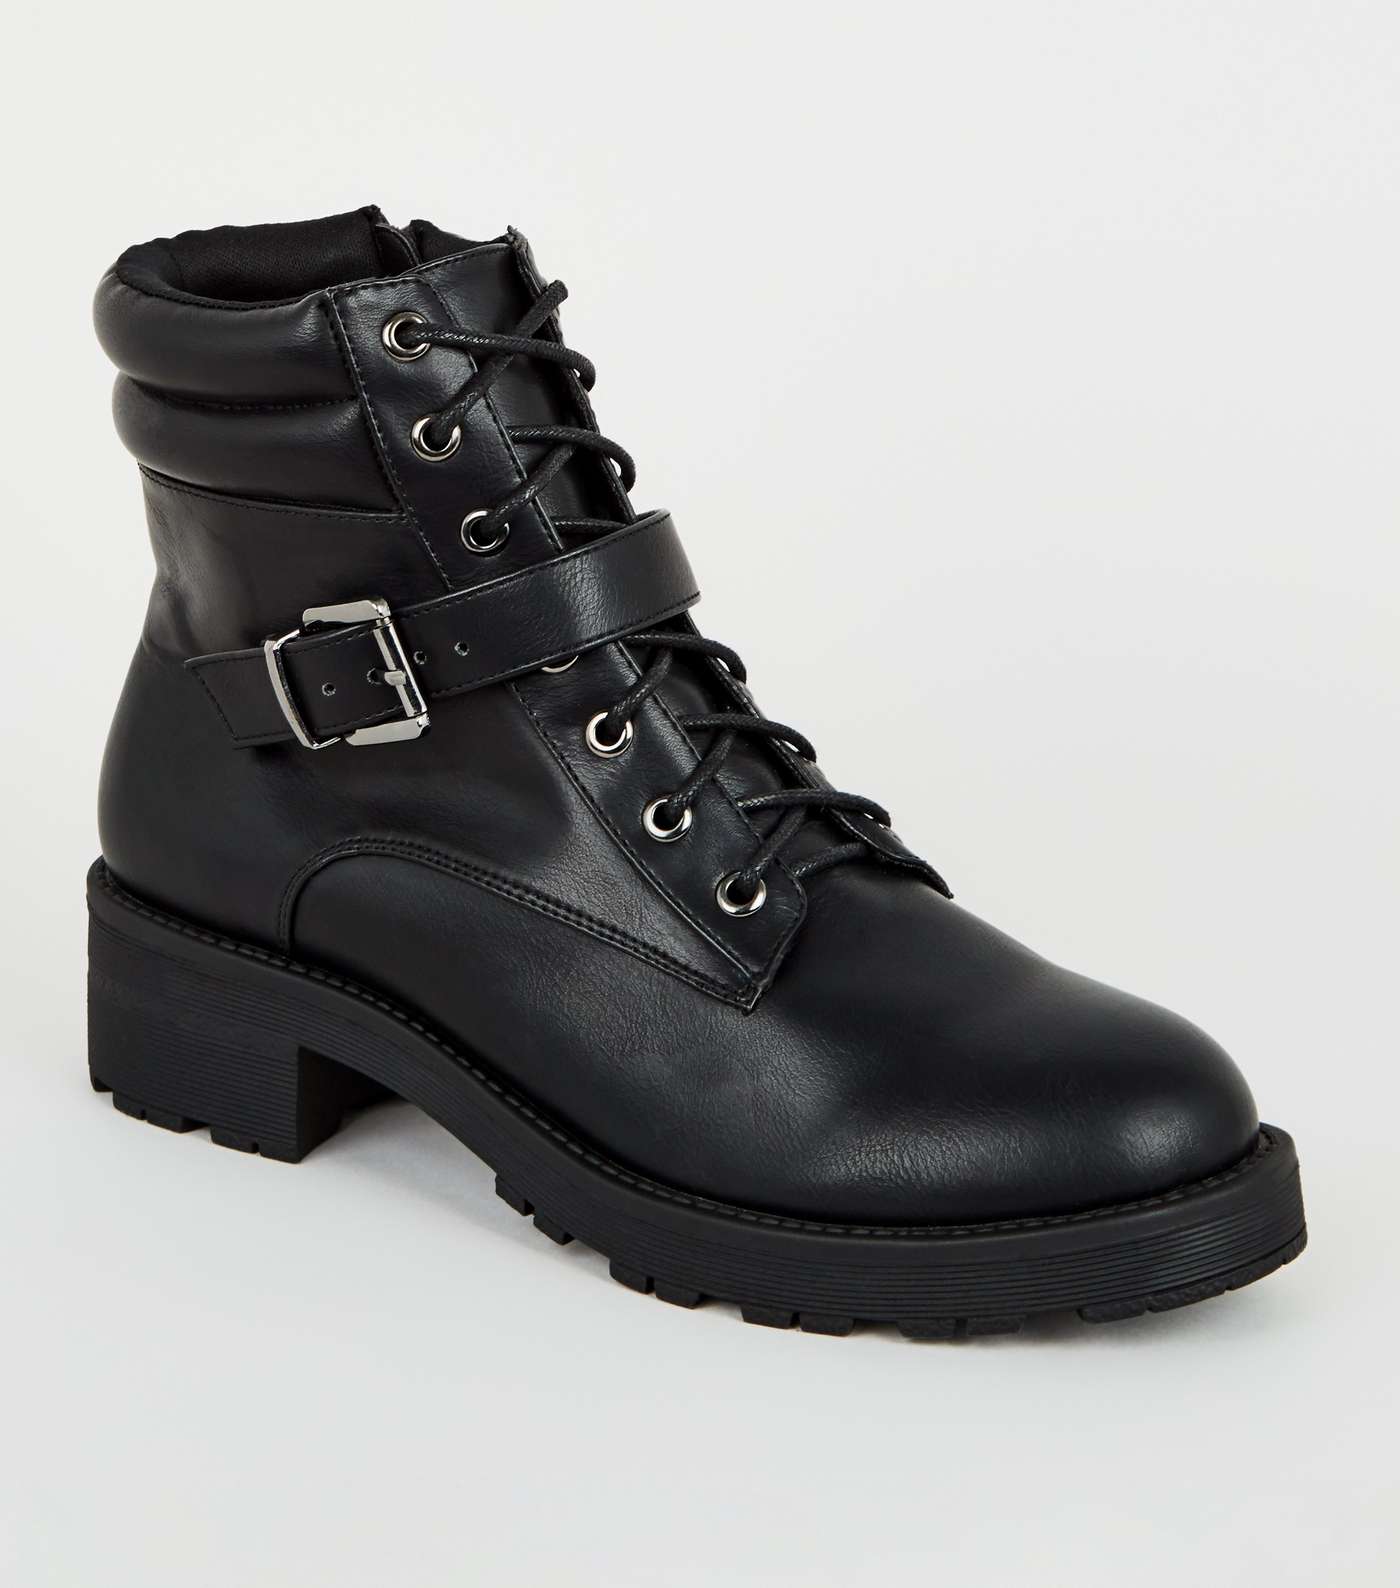 Black Leather-Look Lace Up Hiker Boots